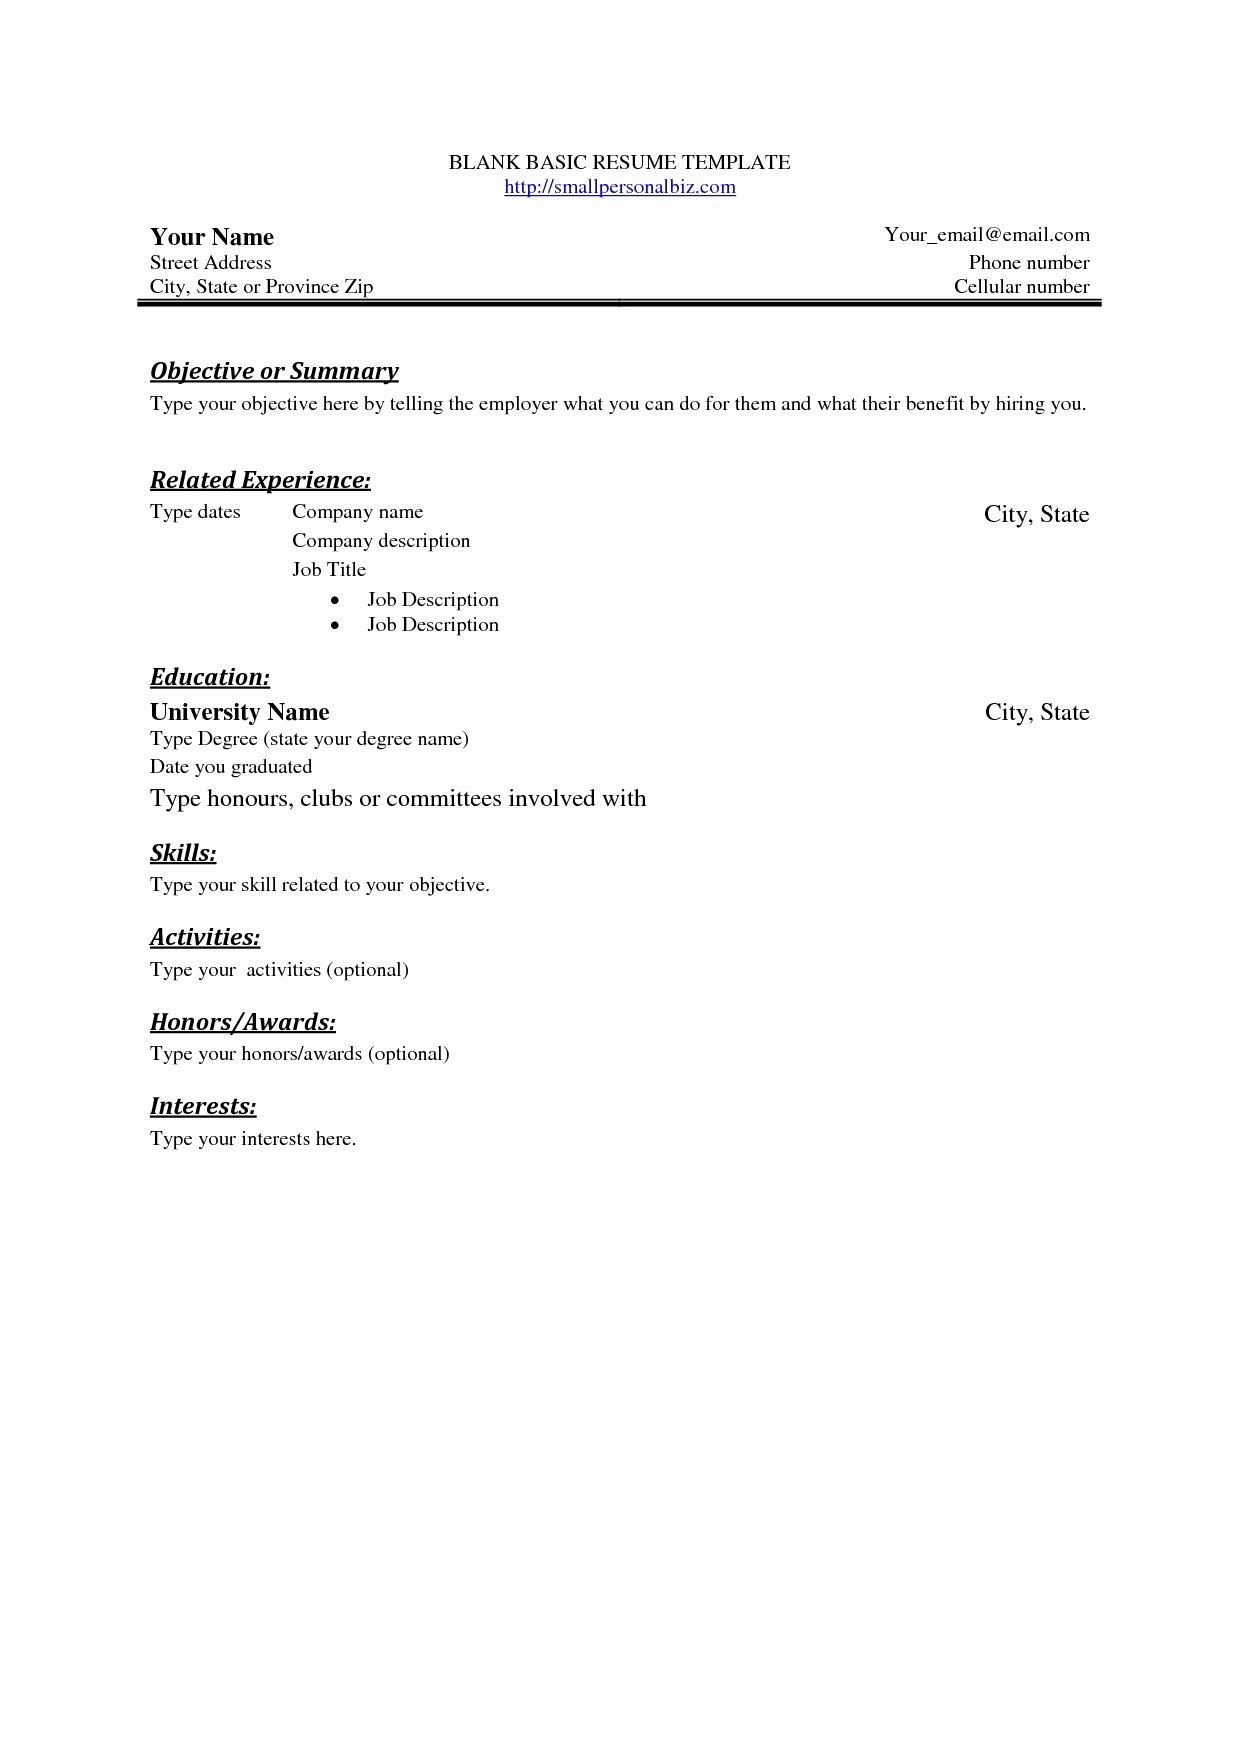 Easy Resume Template Free Cover Letter Templates With Free Basic Resume Templates Microsoft Word